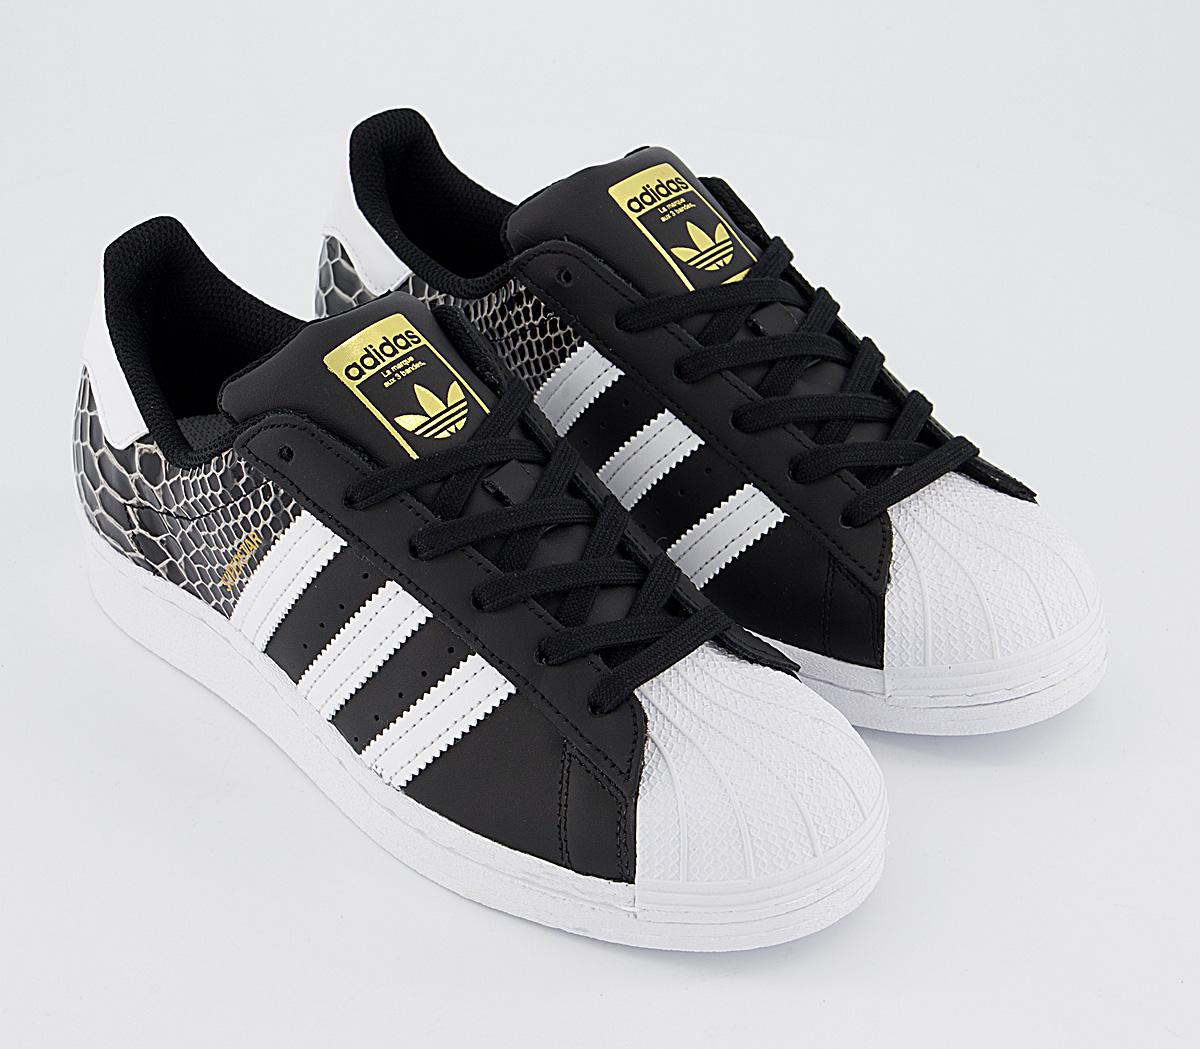 adidas Superstar Trainers Black White White Croc - Hers trainers